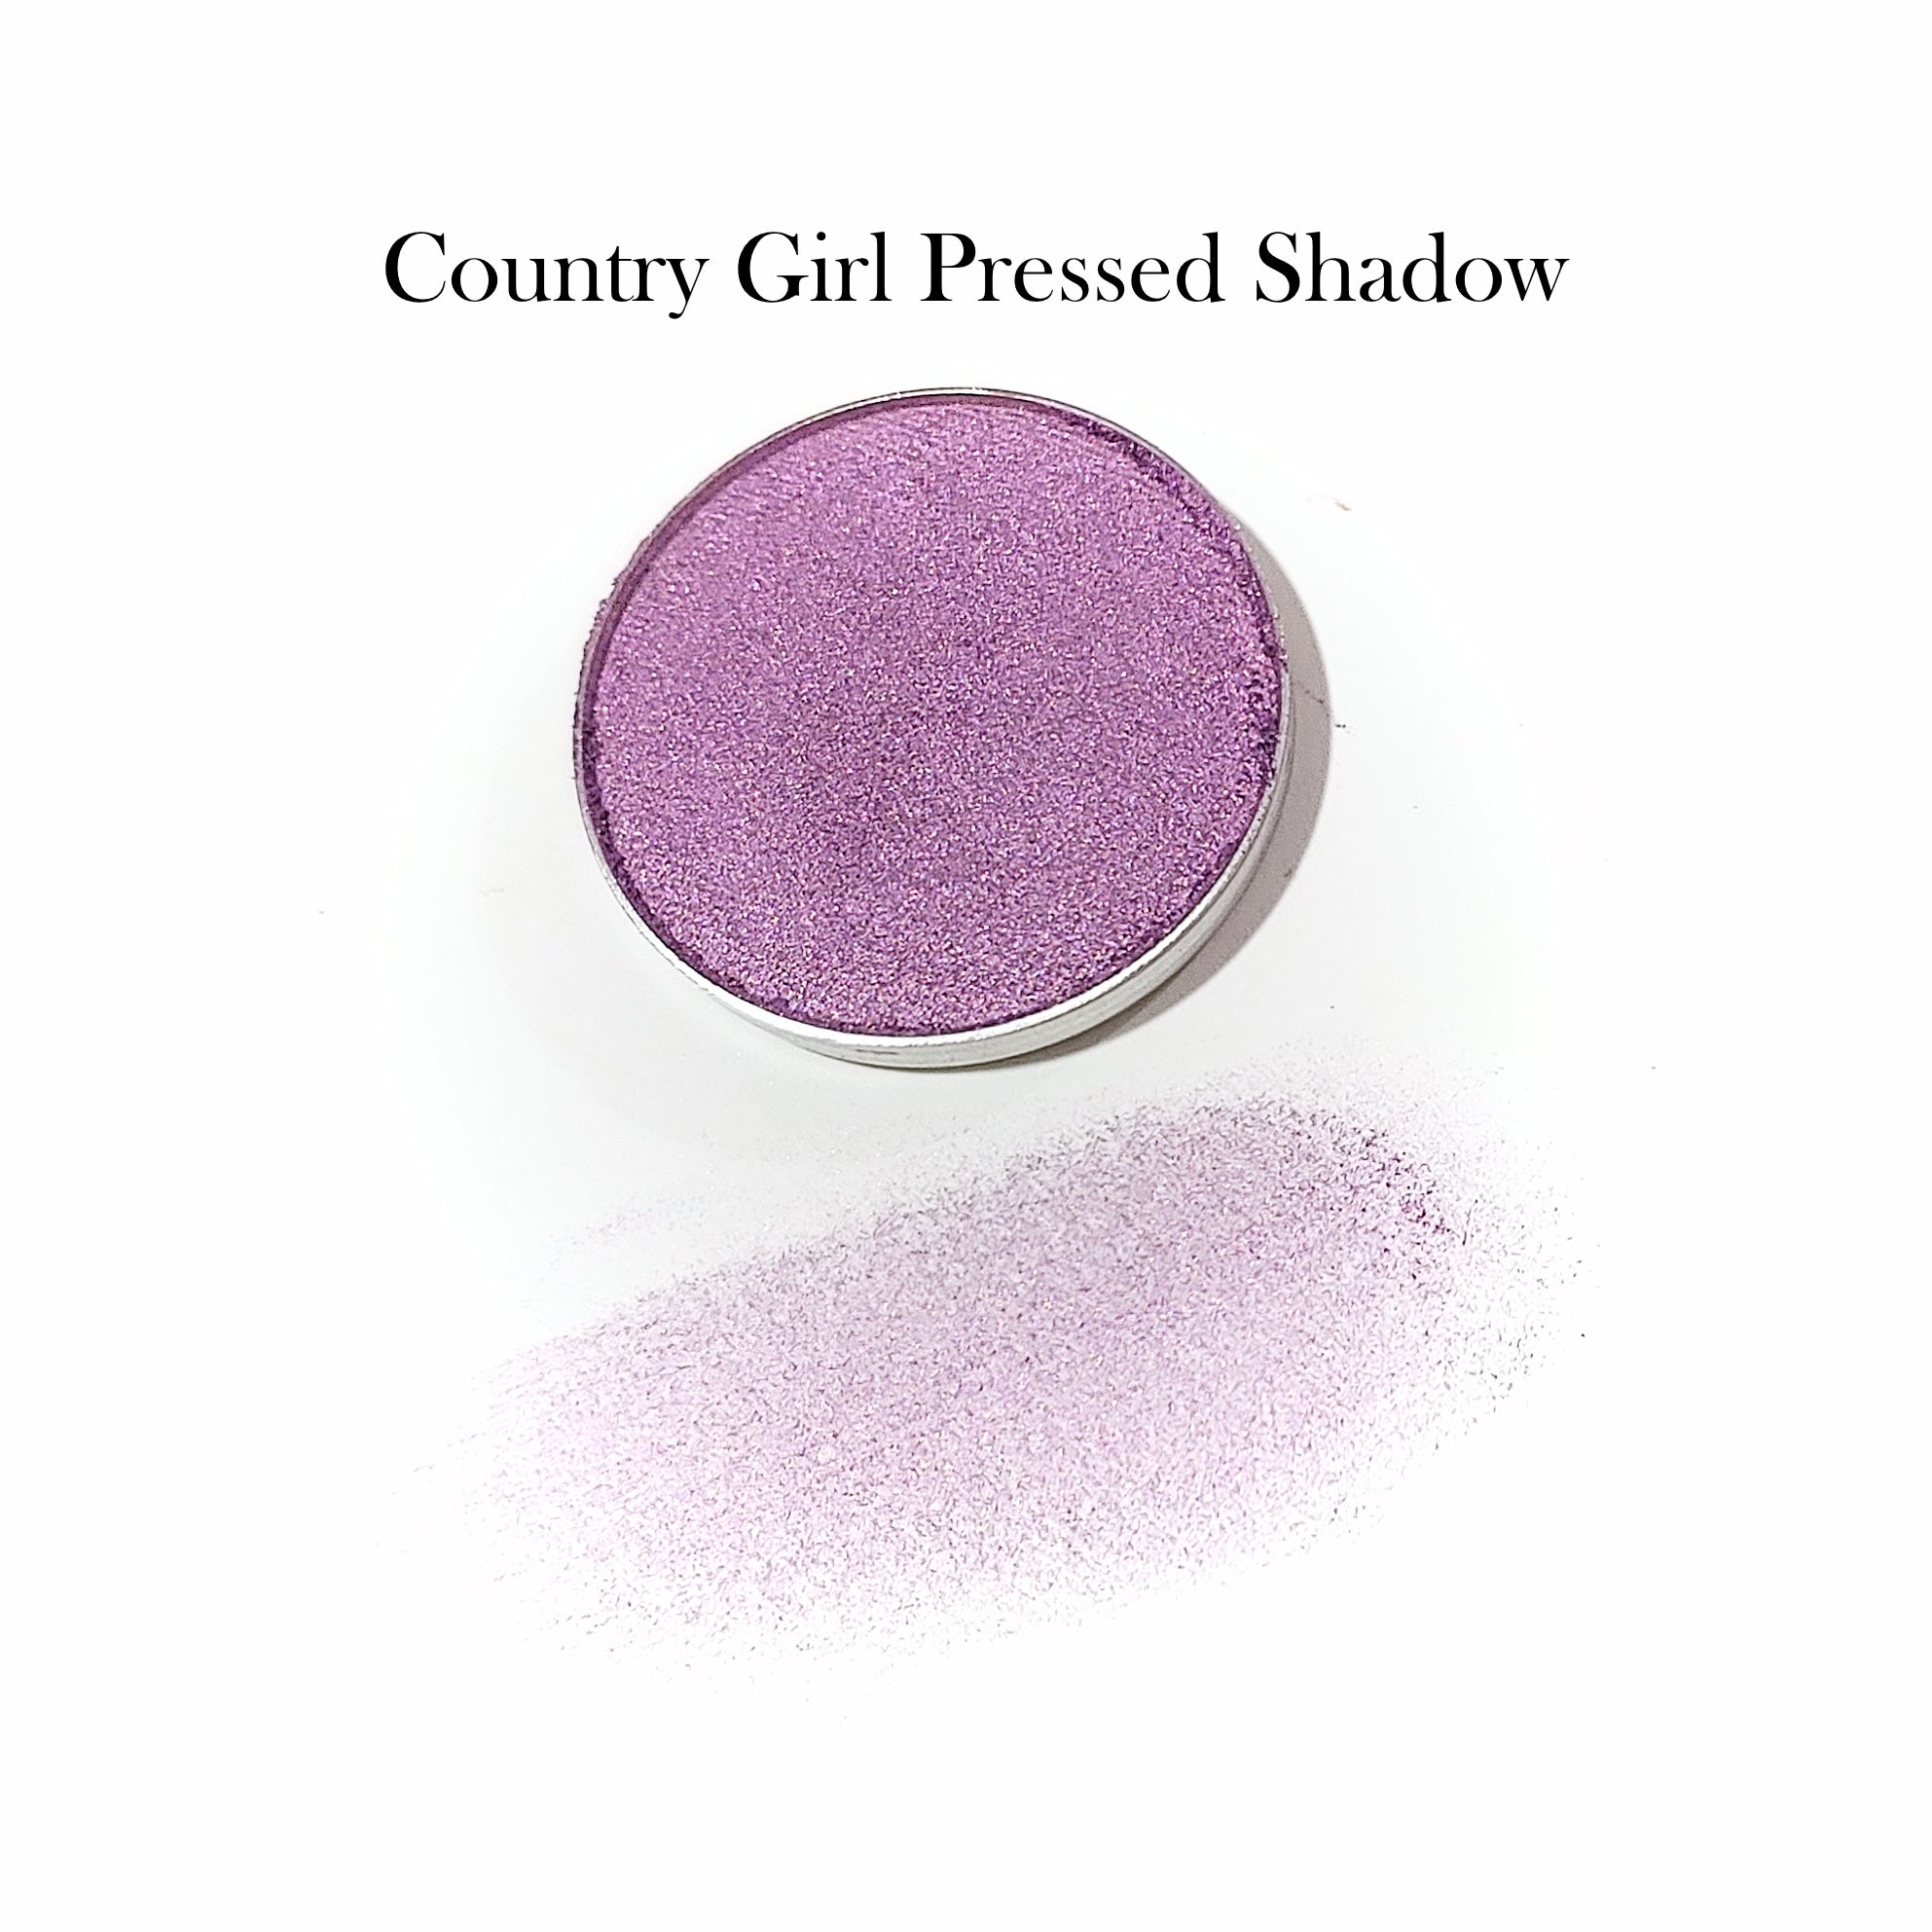 Pressed Mineral Eyeshadow - Country Girl